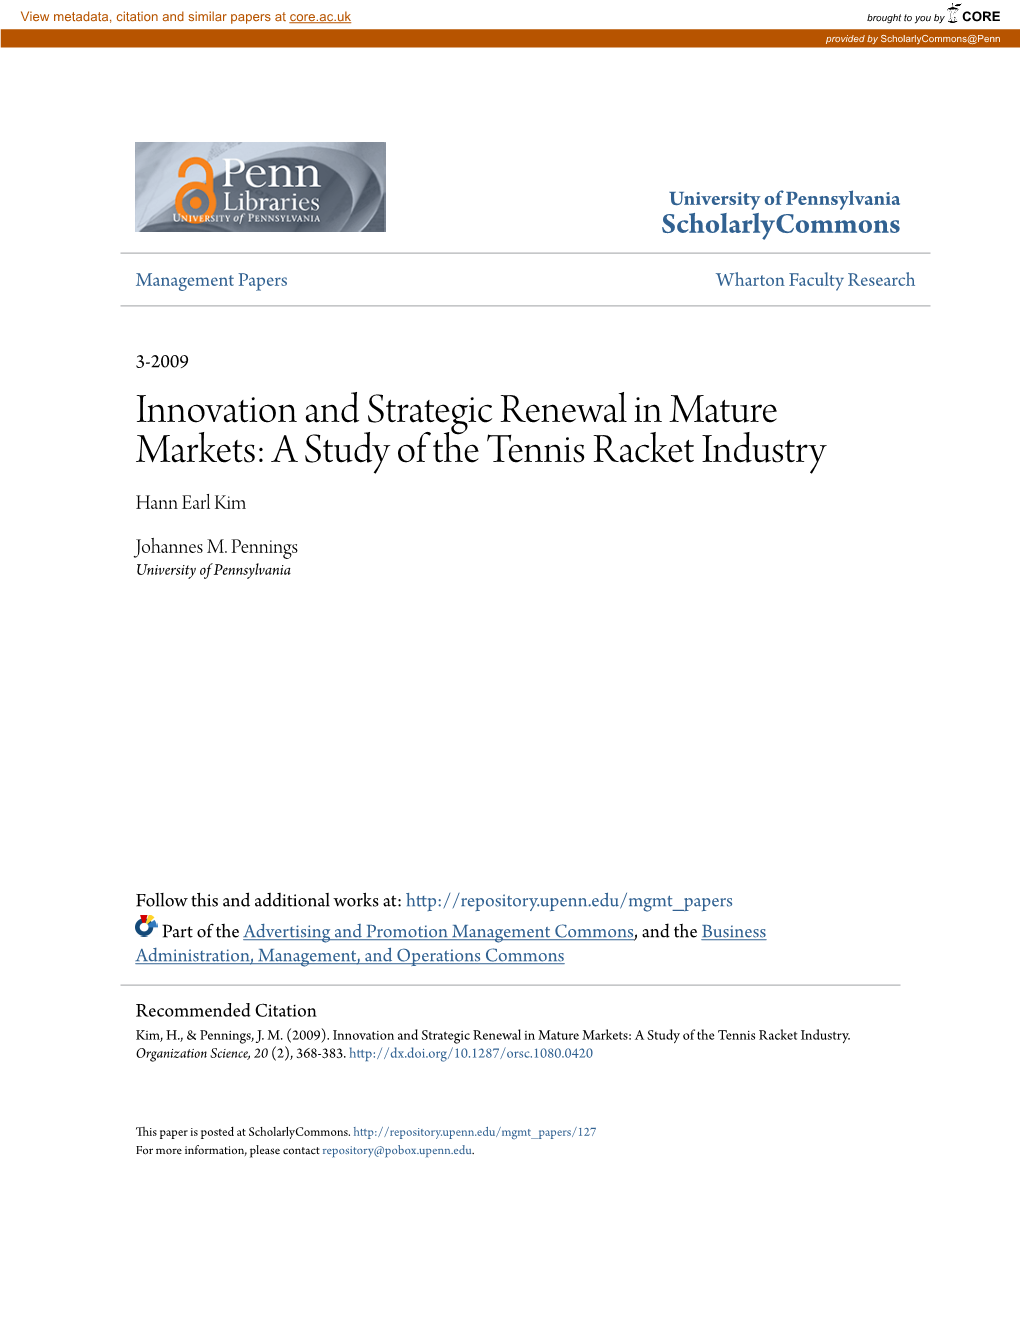 Innovation and Strategic Renewal in Mature Markets: a Study of the Tennis Racket Industry Hann Earl Kim